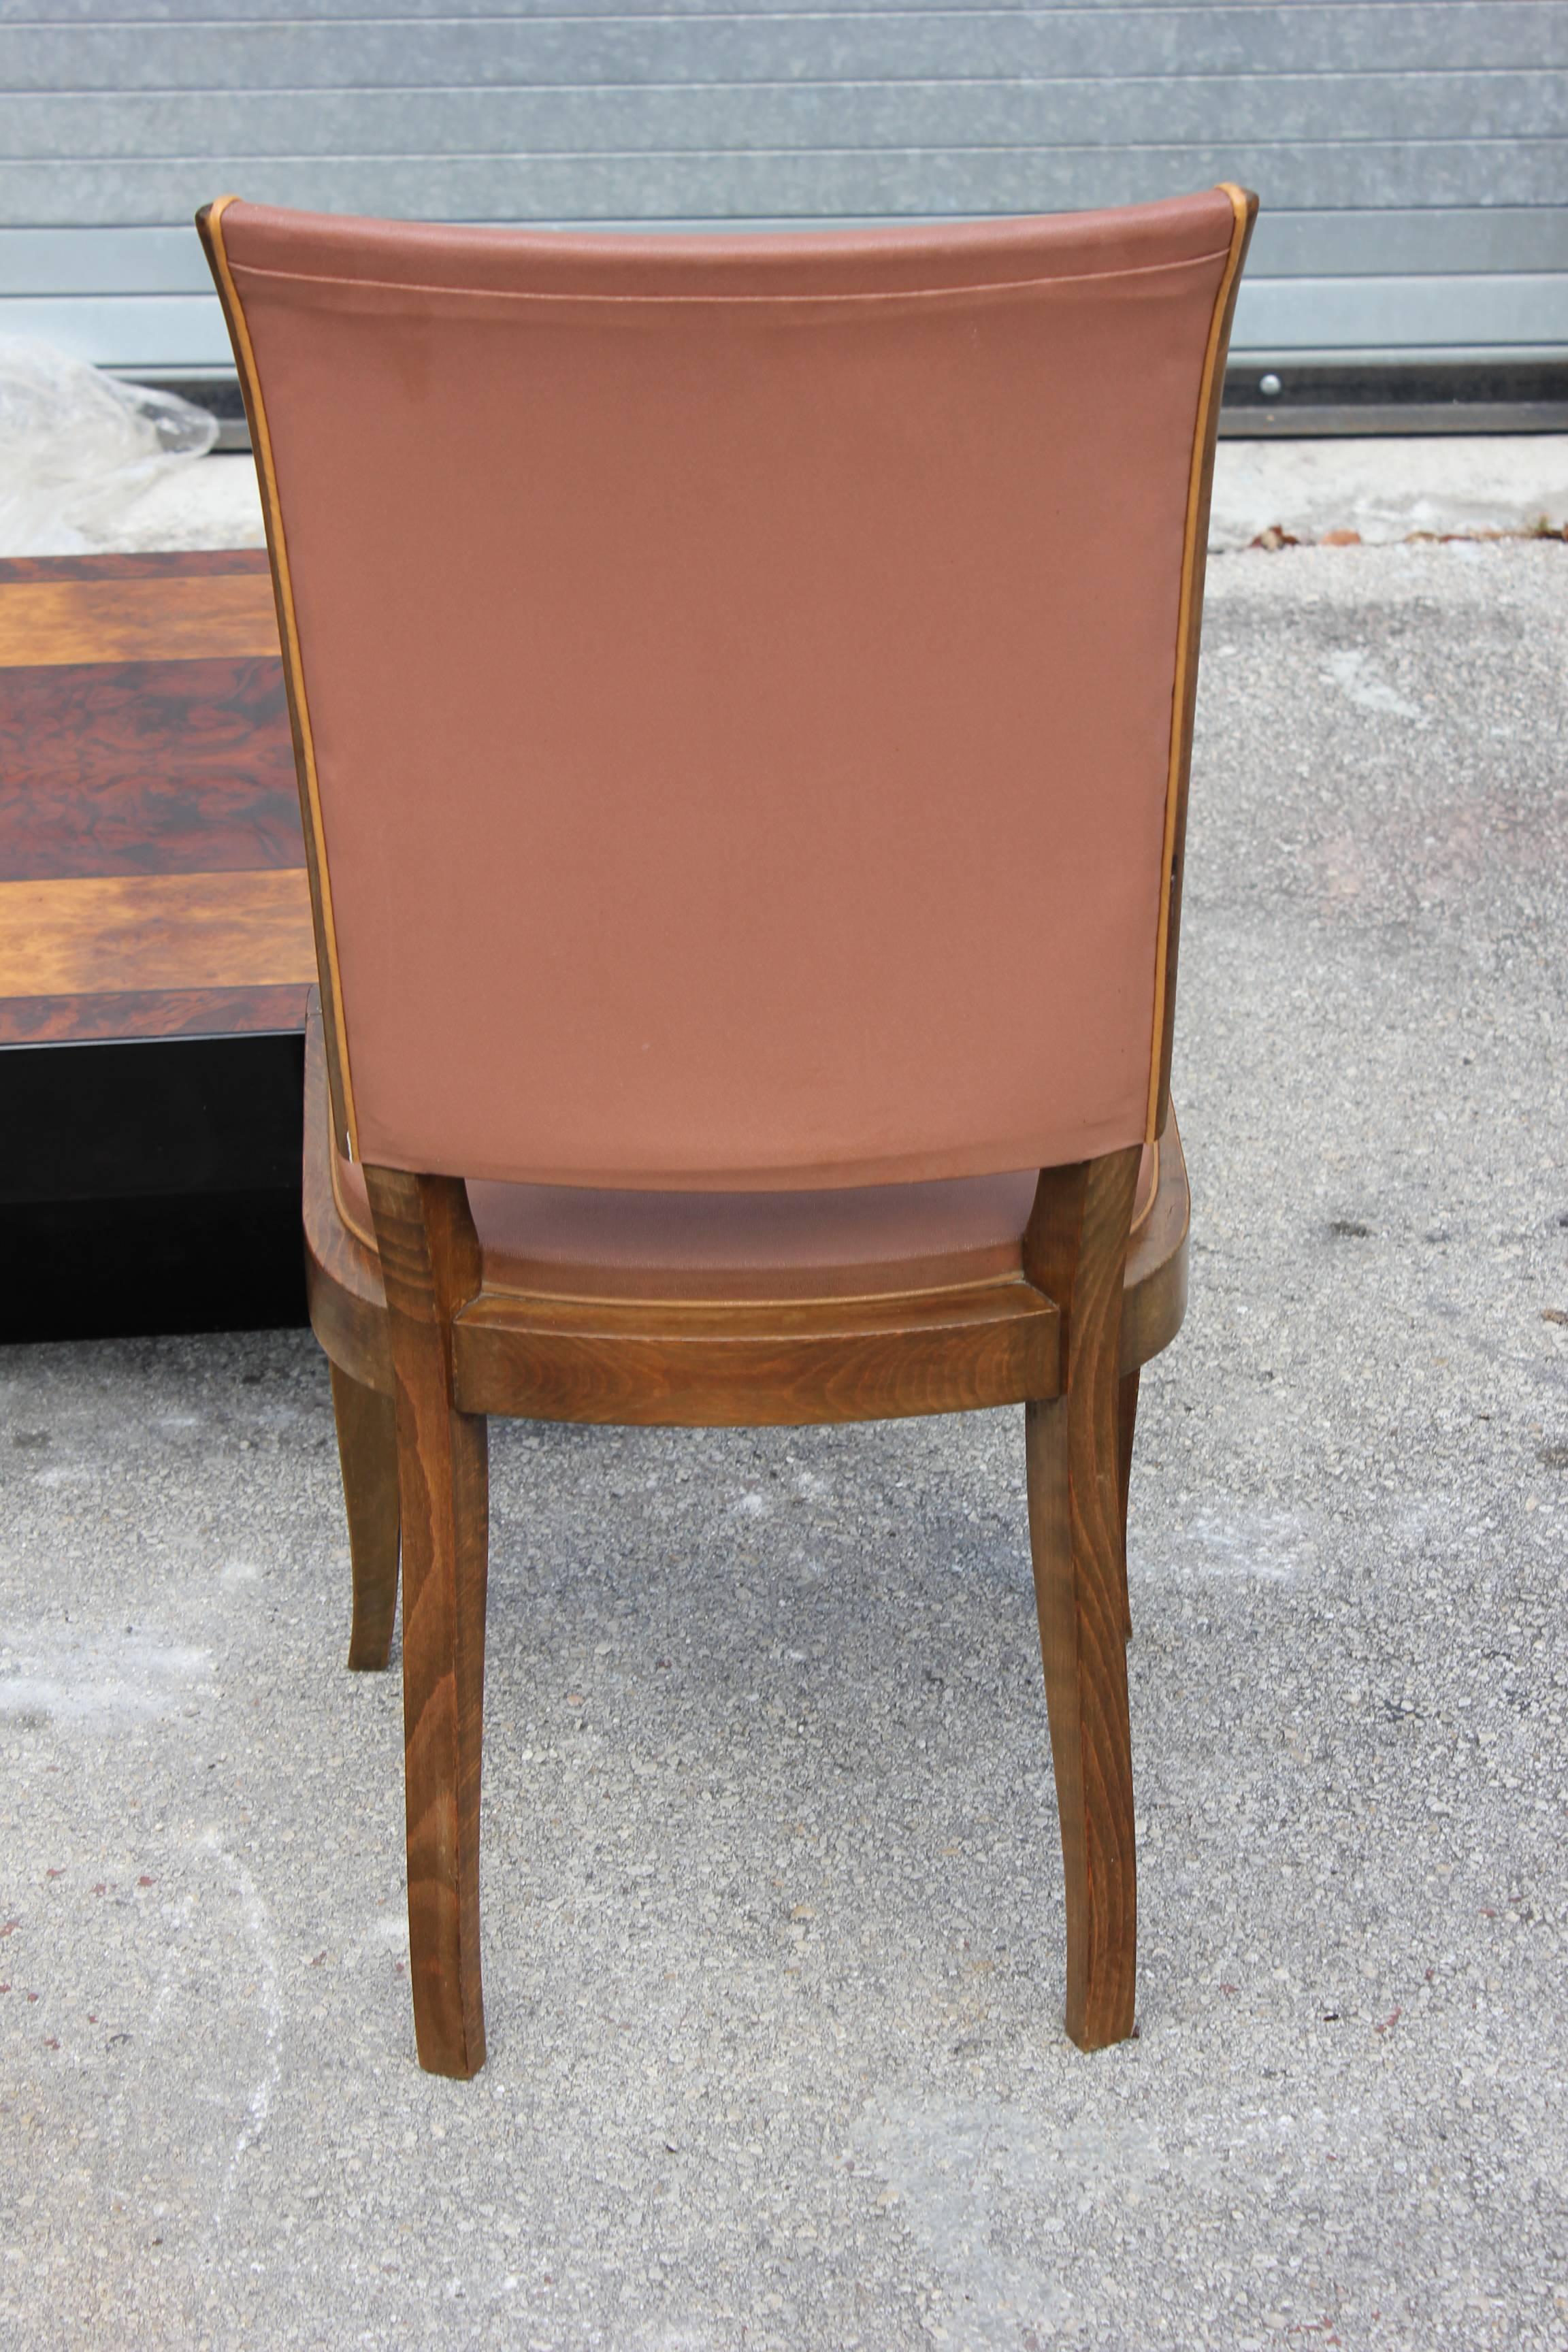 Mid-20th Century Suite of Six French Art Deco Classic Mahogany Dining Chairs, circa 1940s